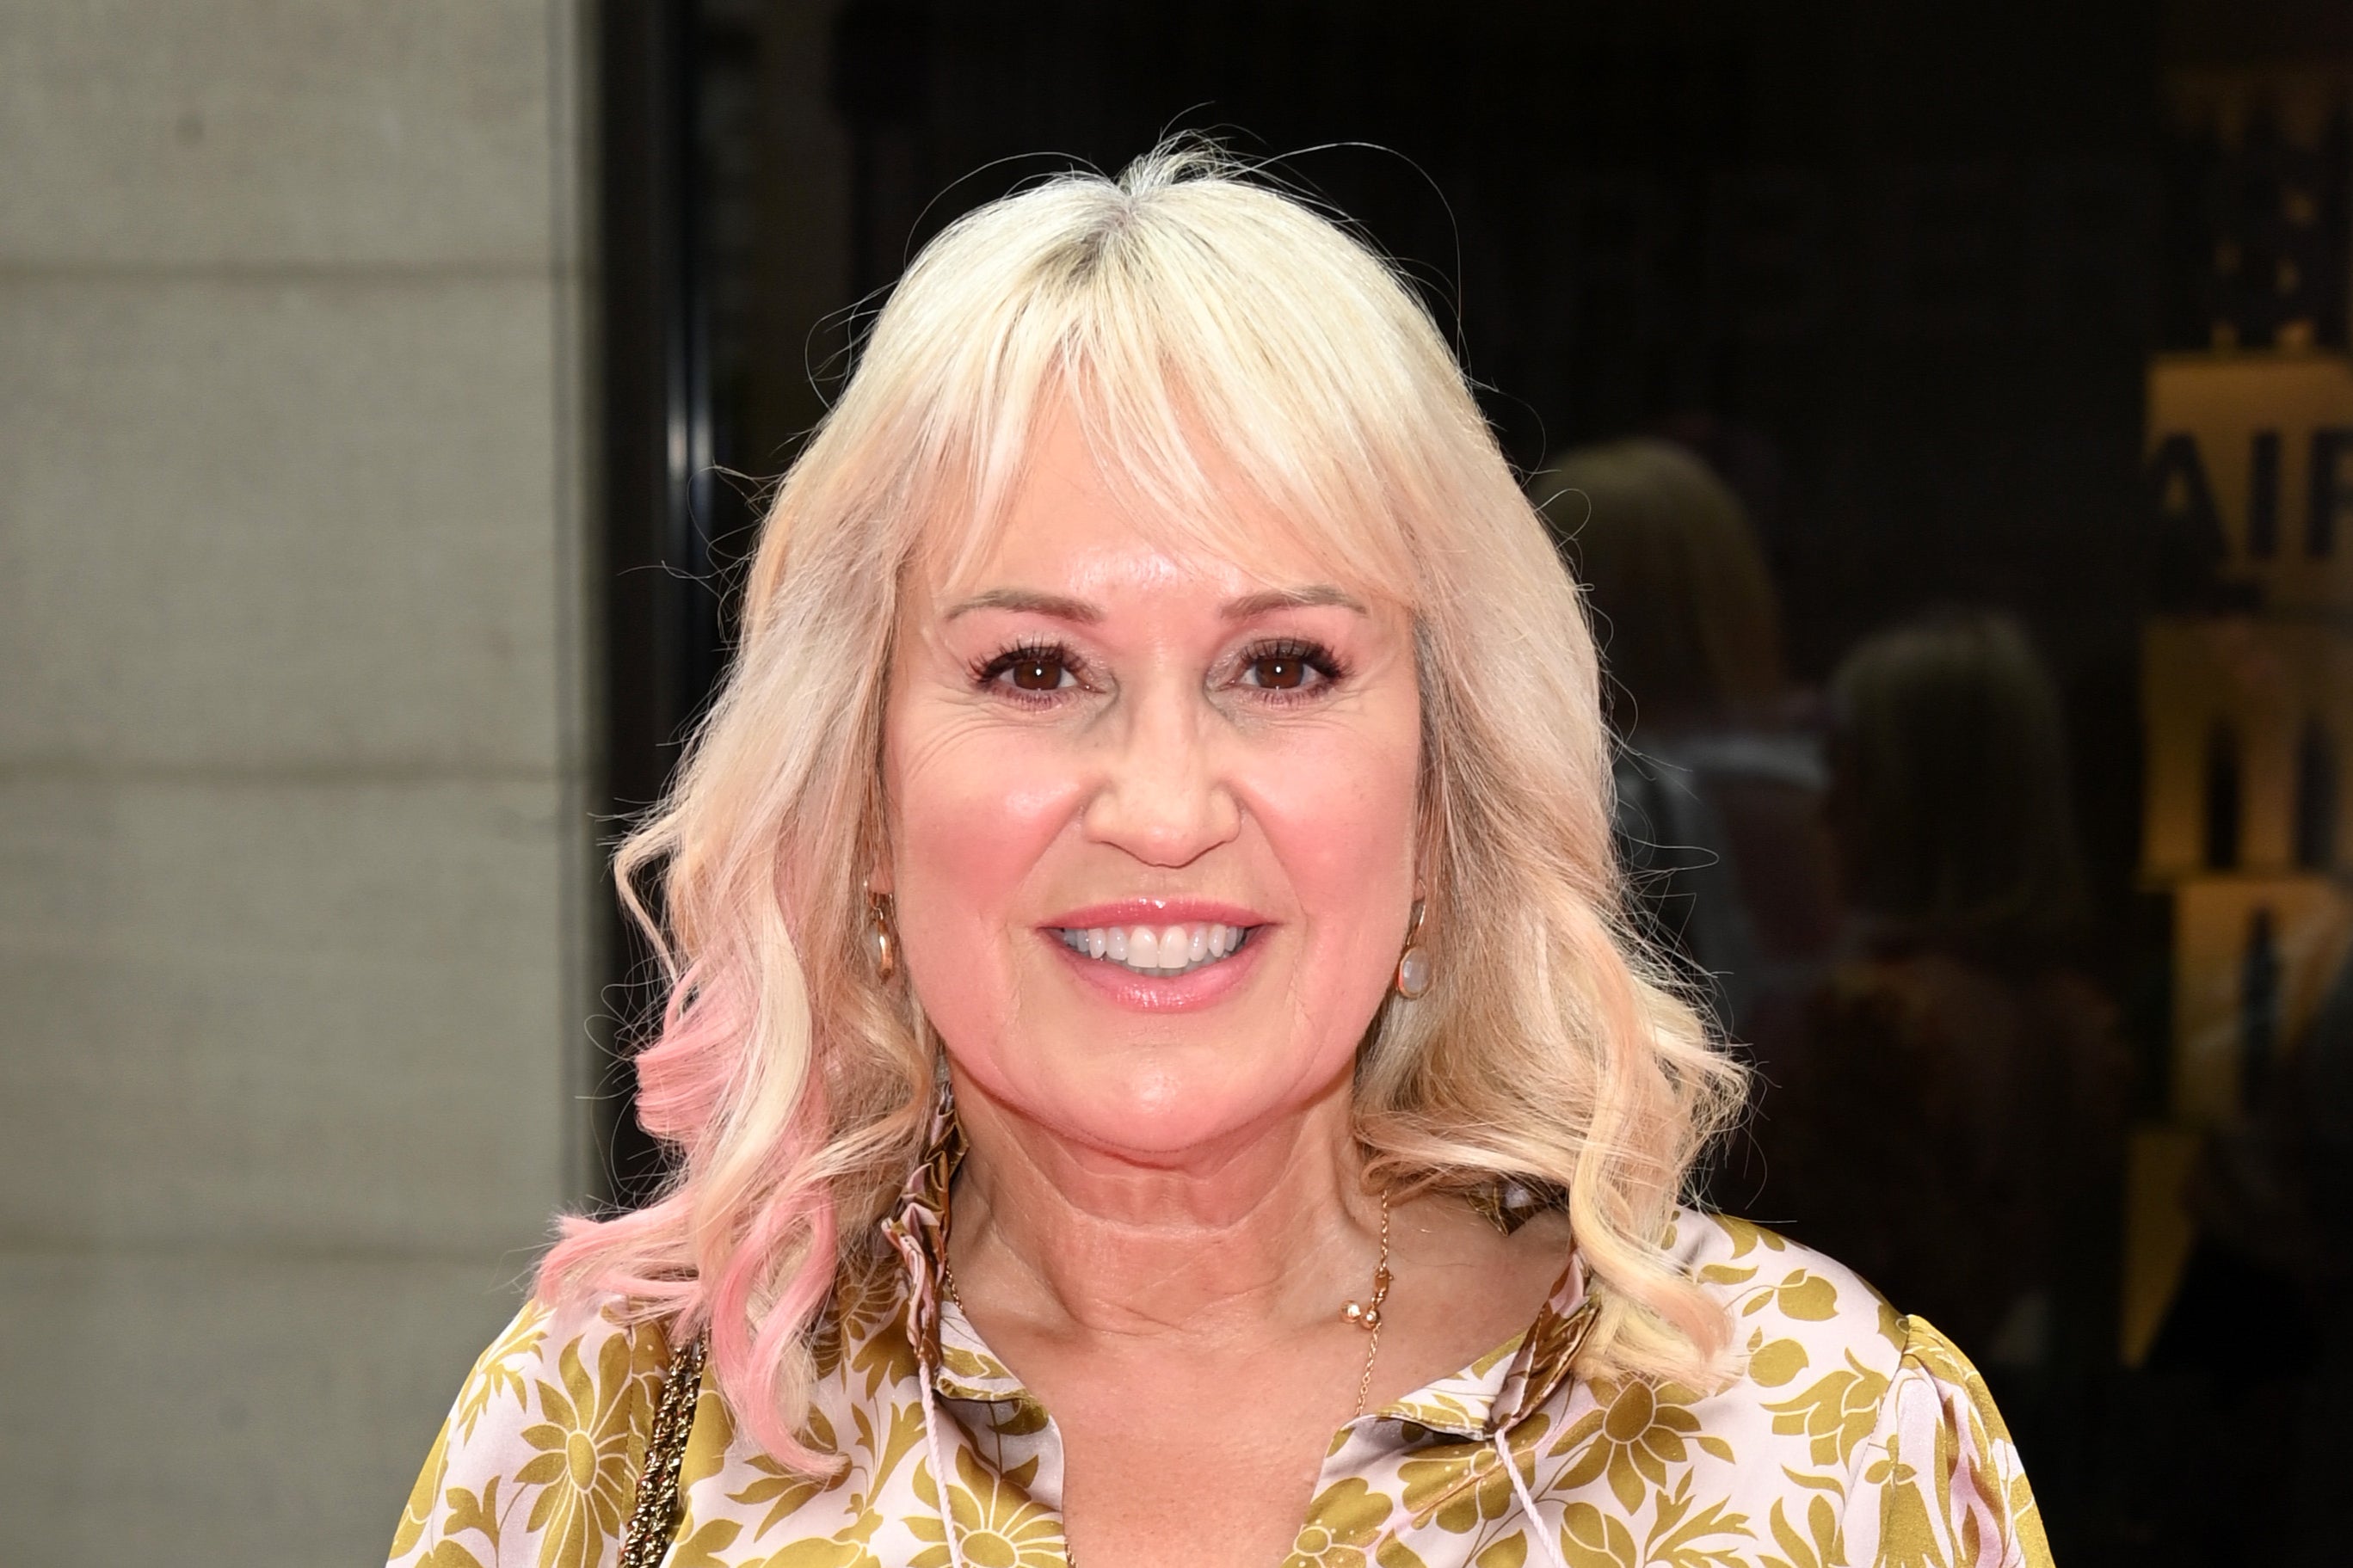 Nicki Chapman will temporarily take over ‘Love Songs’ until a permanent replacement is announced for Easter